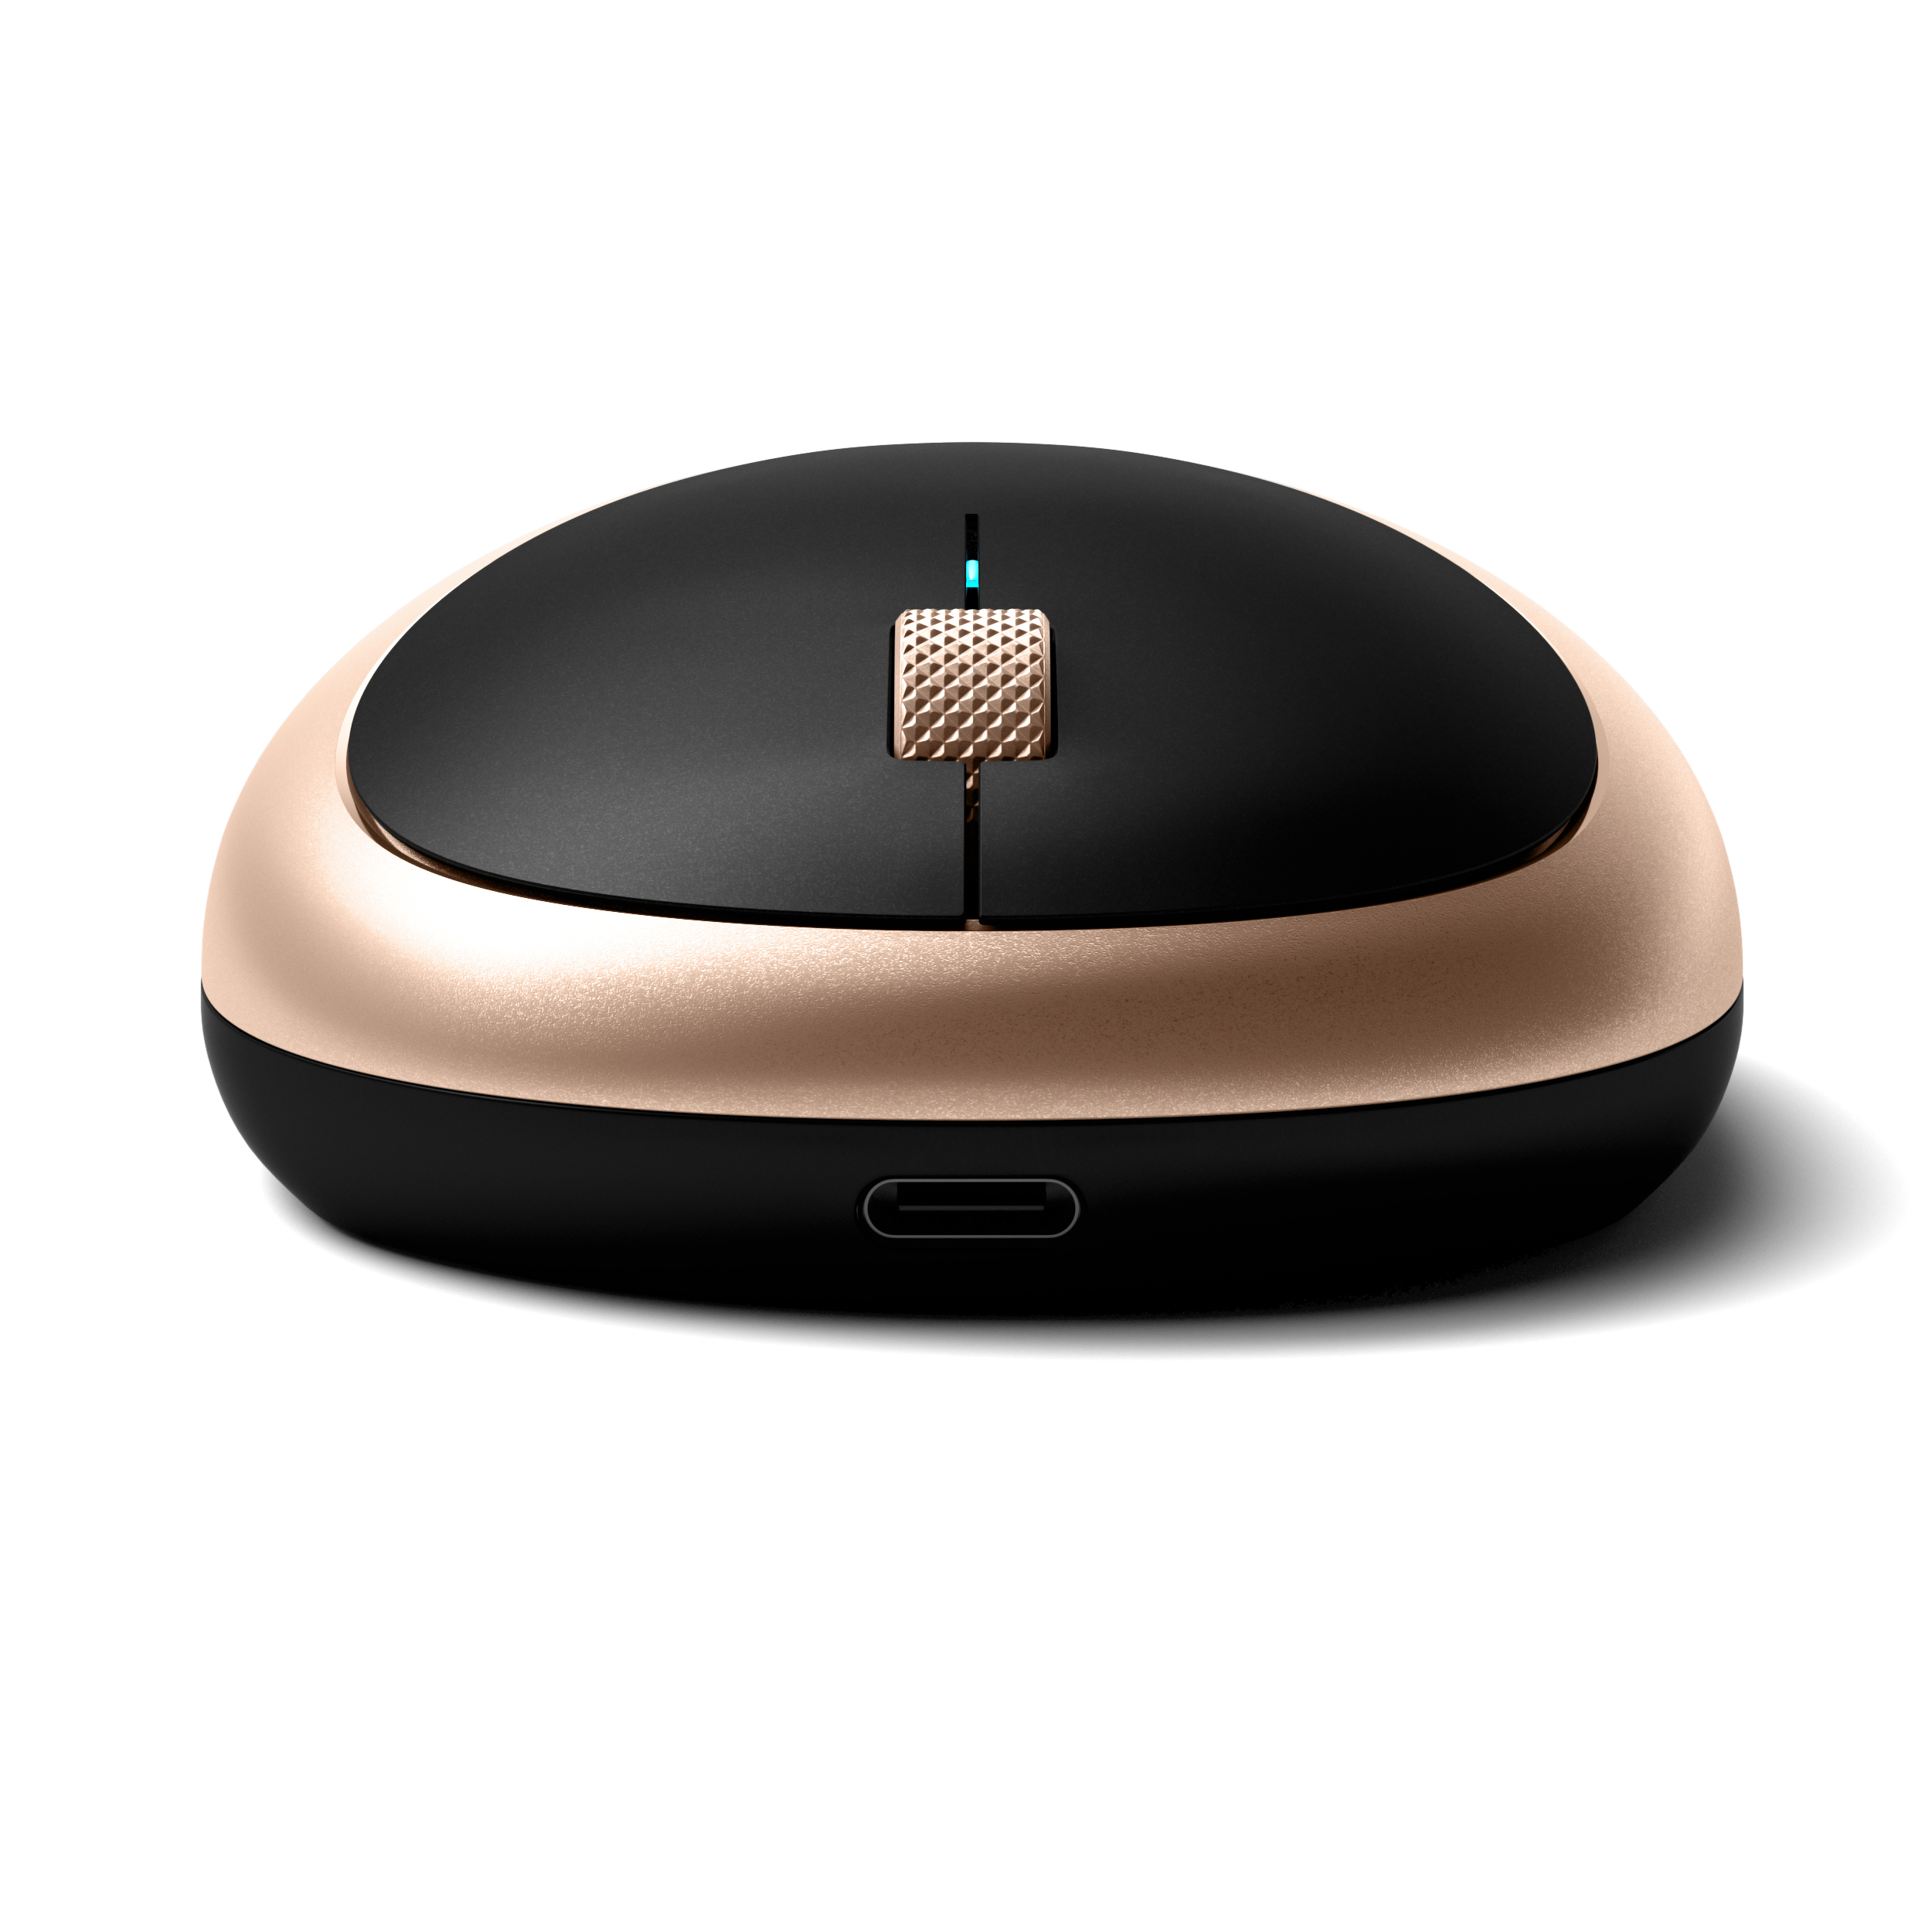 Gold M1 Mouse, Wireless Mouse Wireless - Gold SATECHI Bluetooth